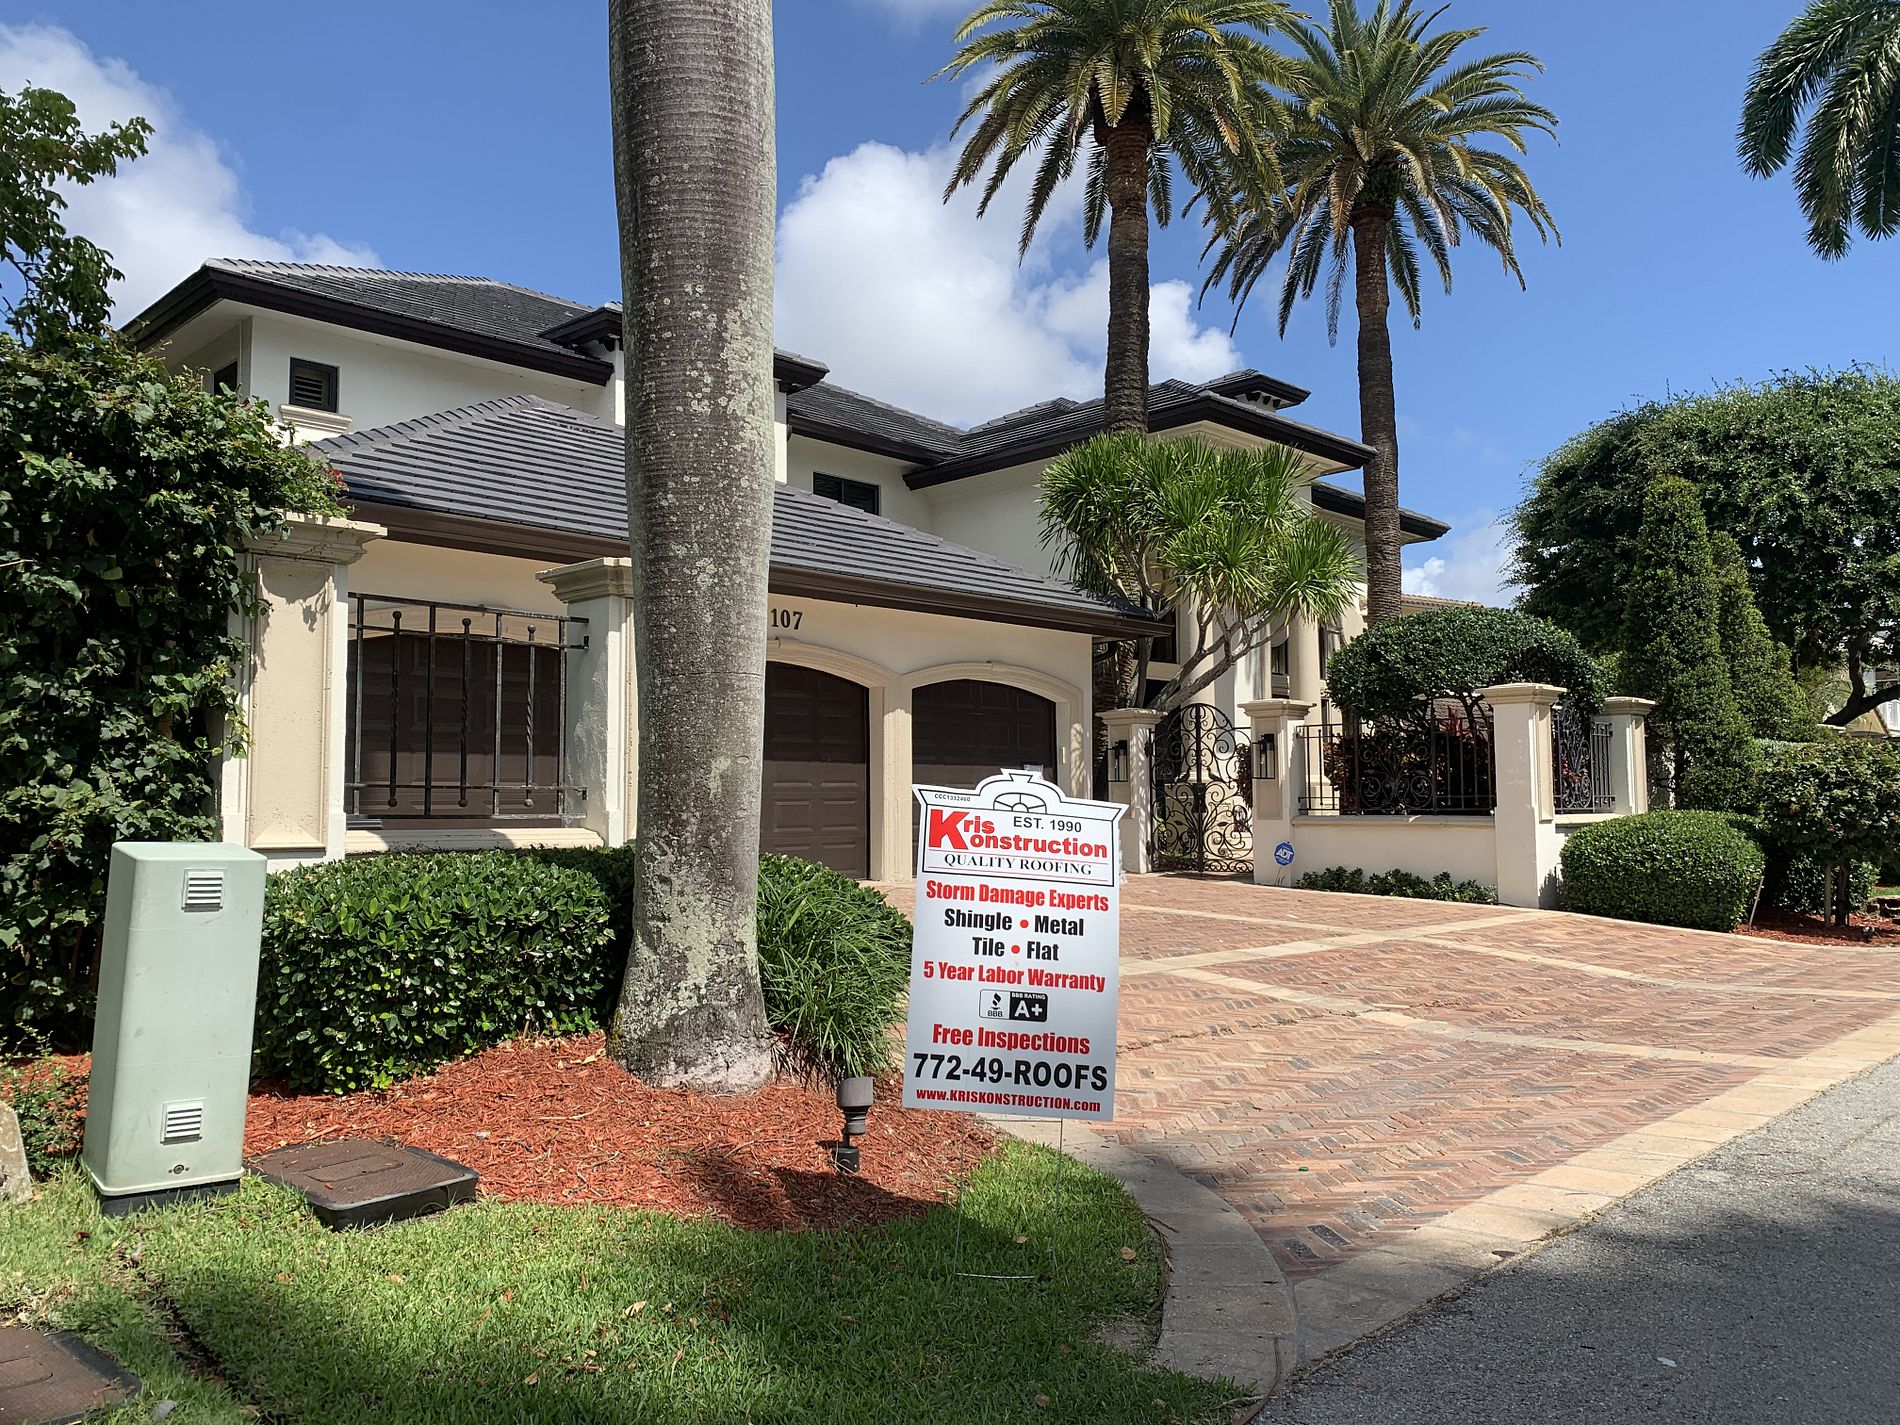 Tile roof replacement in Fort Lauderdale, FL